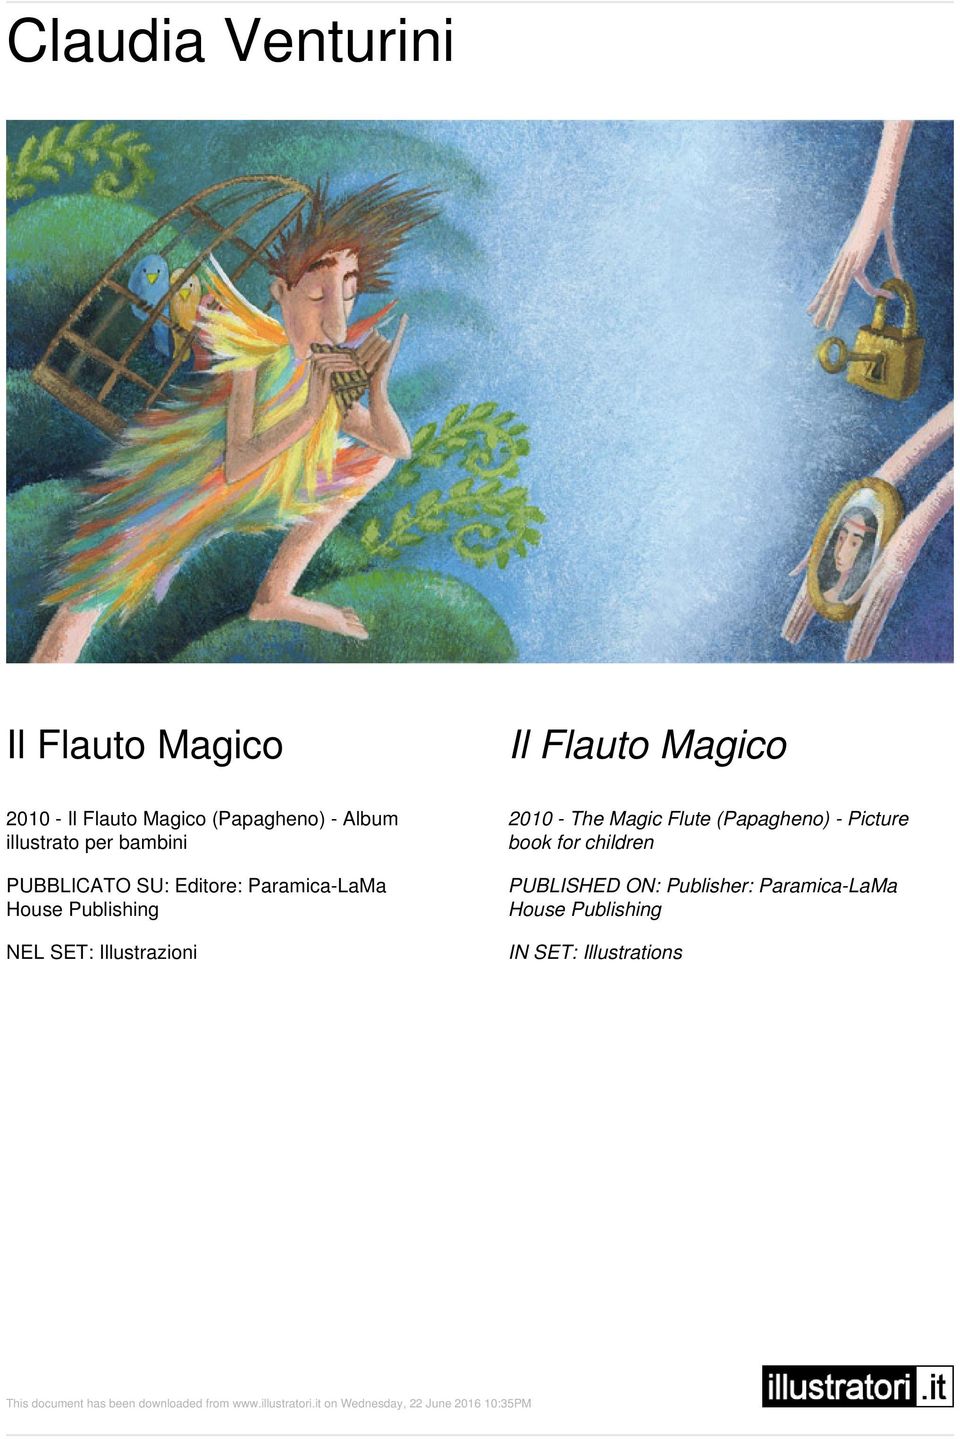 2010 - The Magic Flute (Papagheno) - Picture